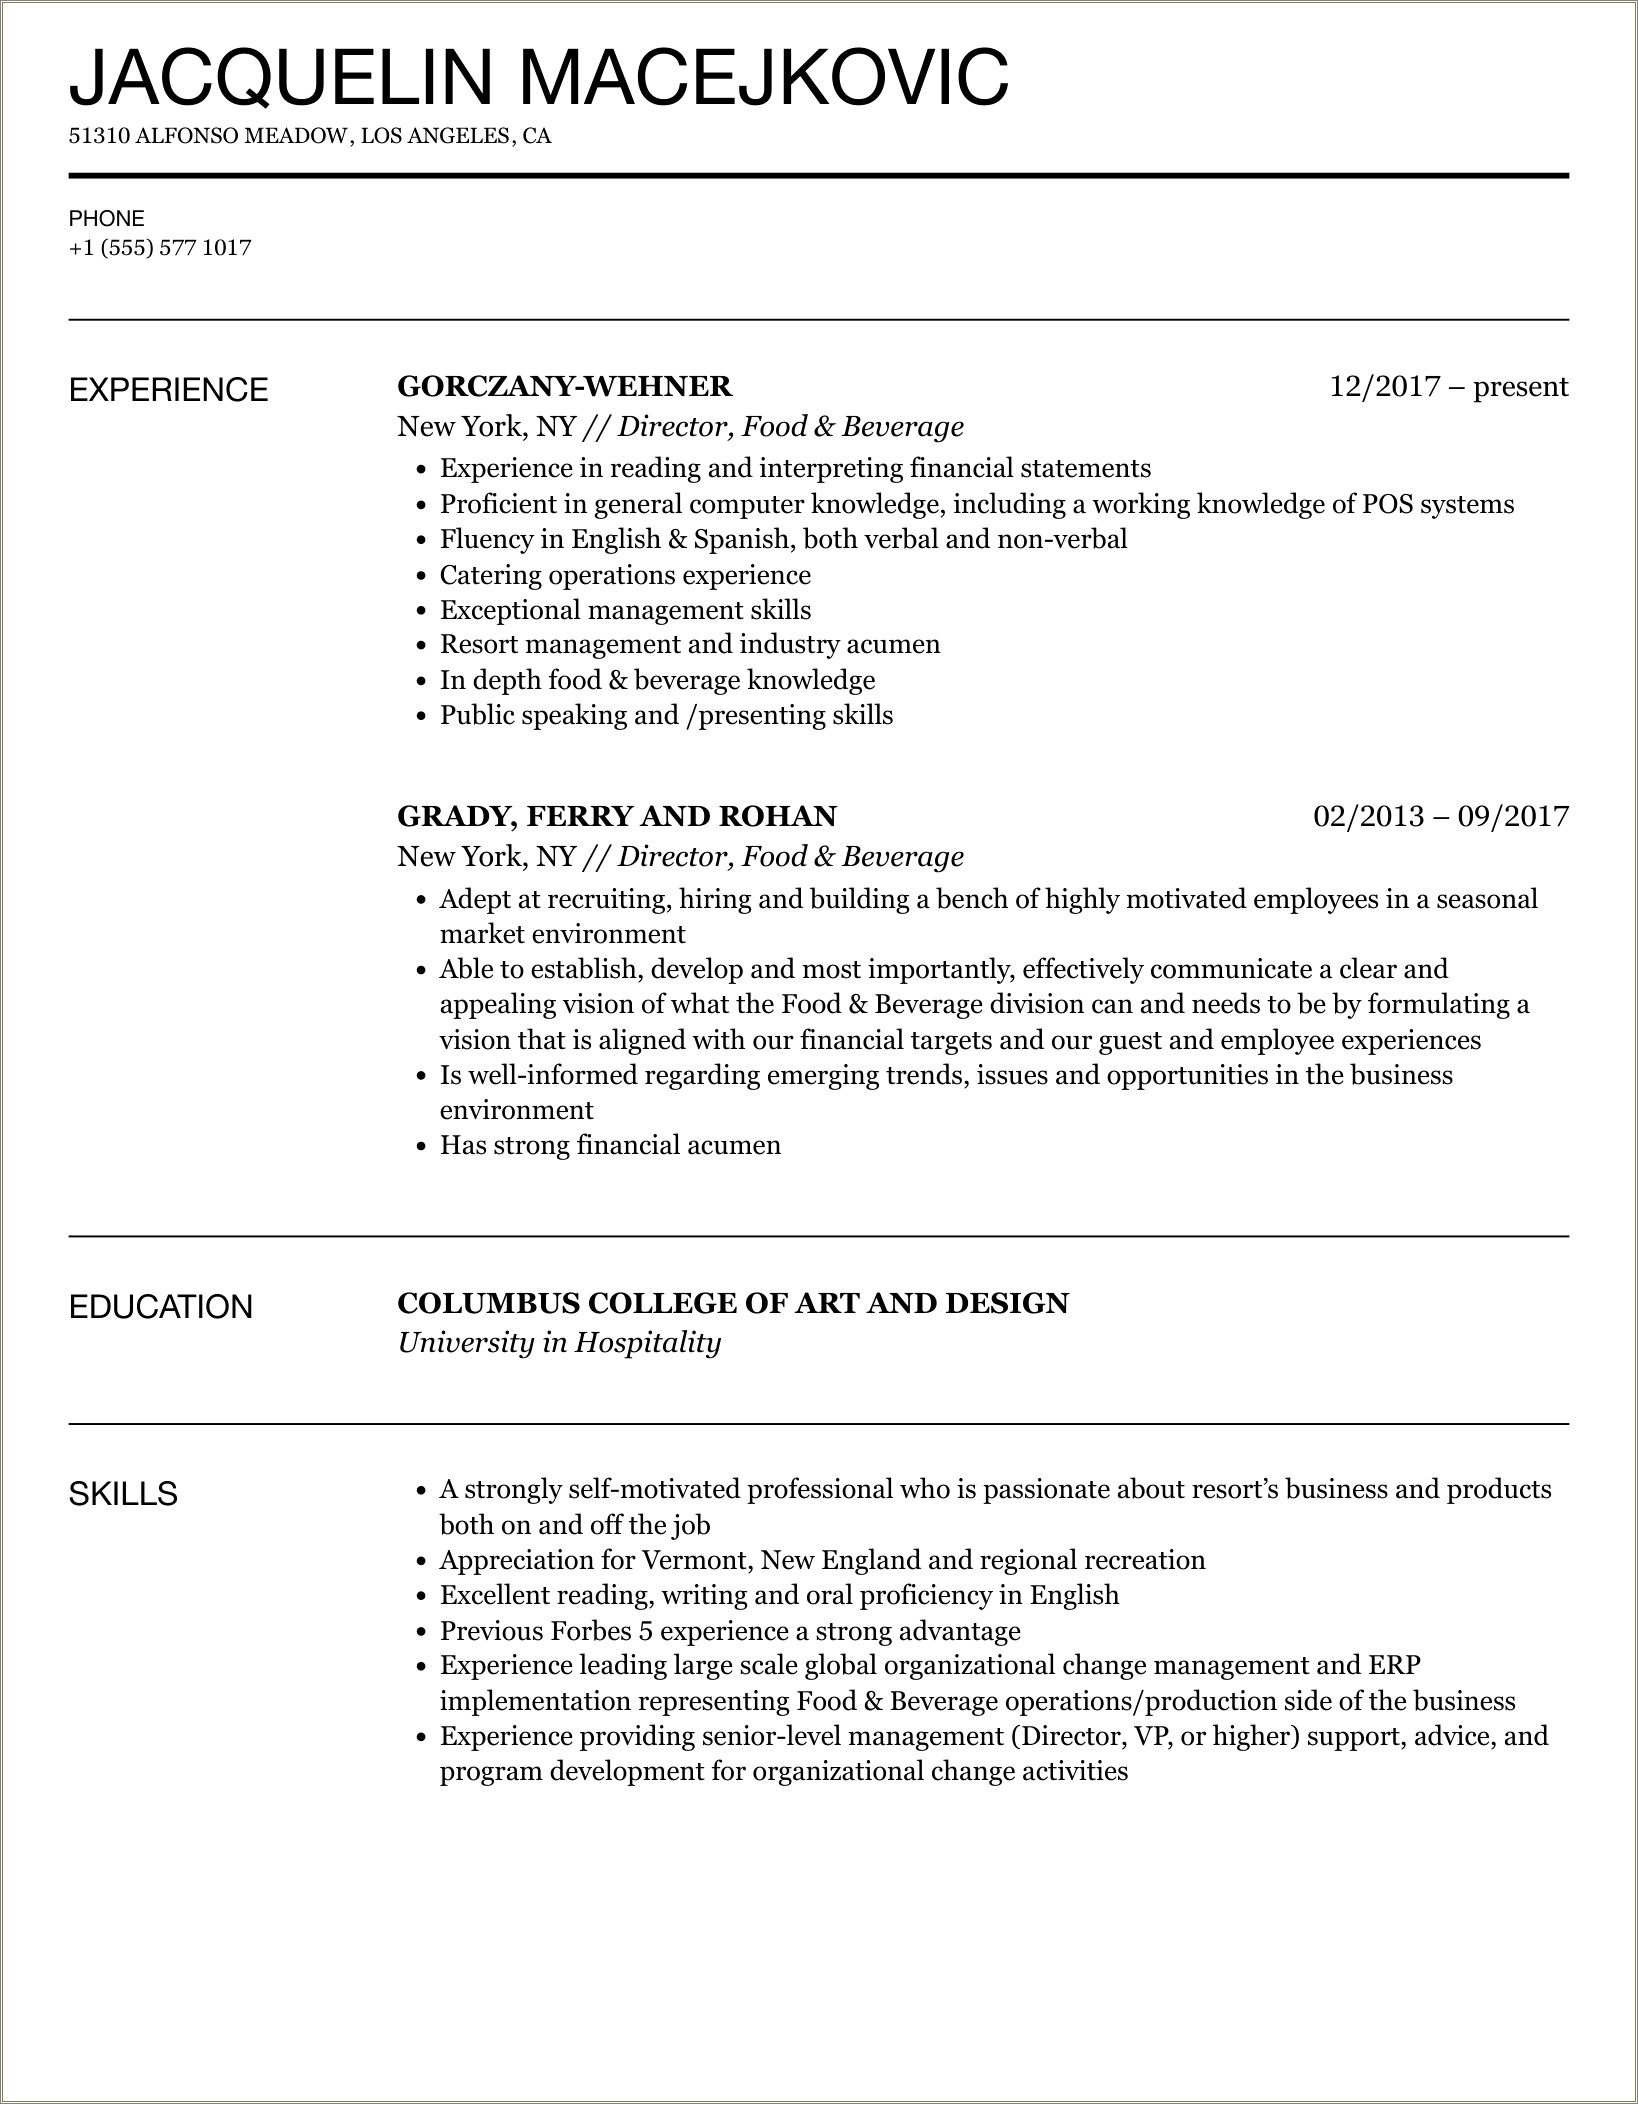 Casino Vp Of Food And Beverage Resume Examples